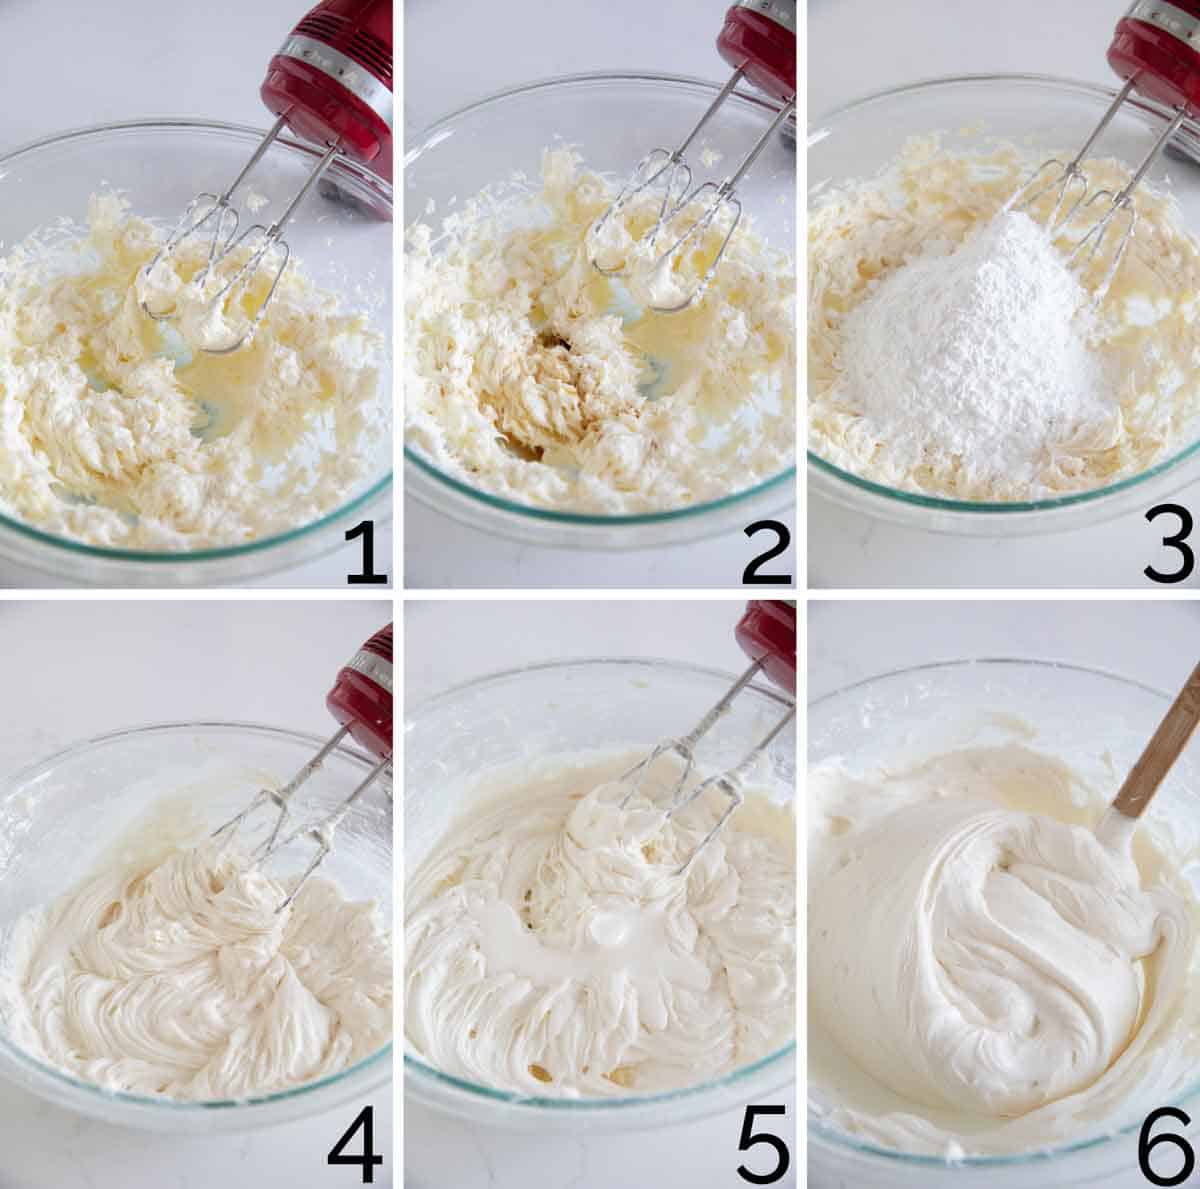 photos showing steps to make cream cheese frosting